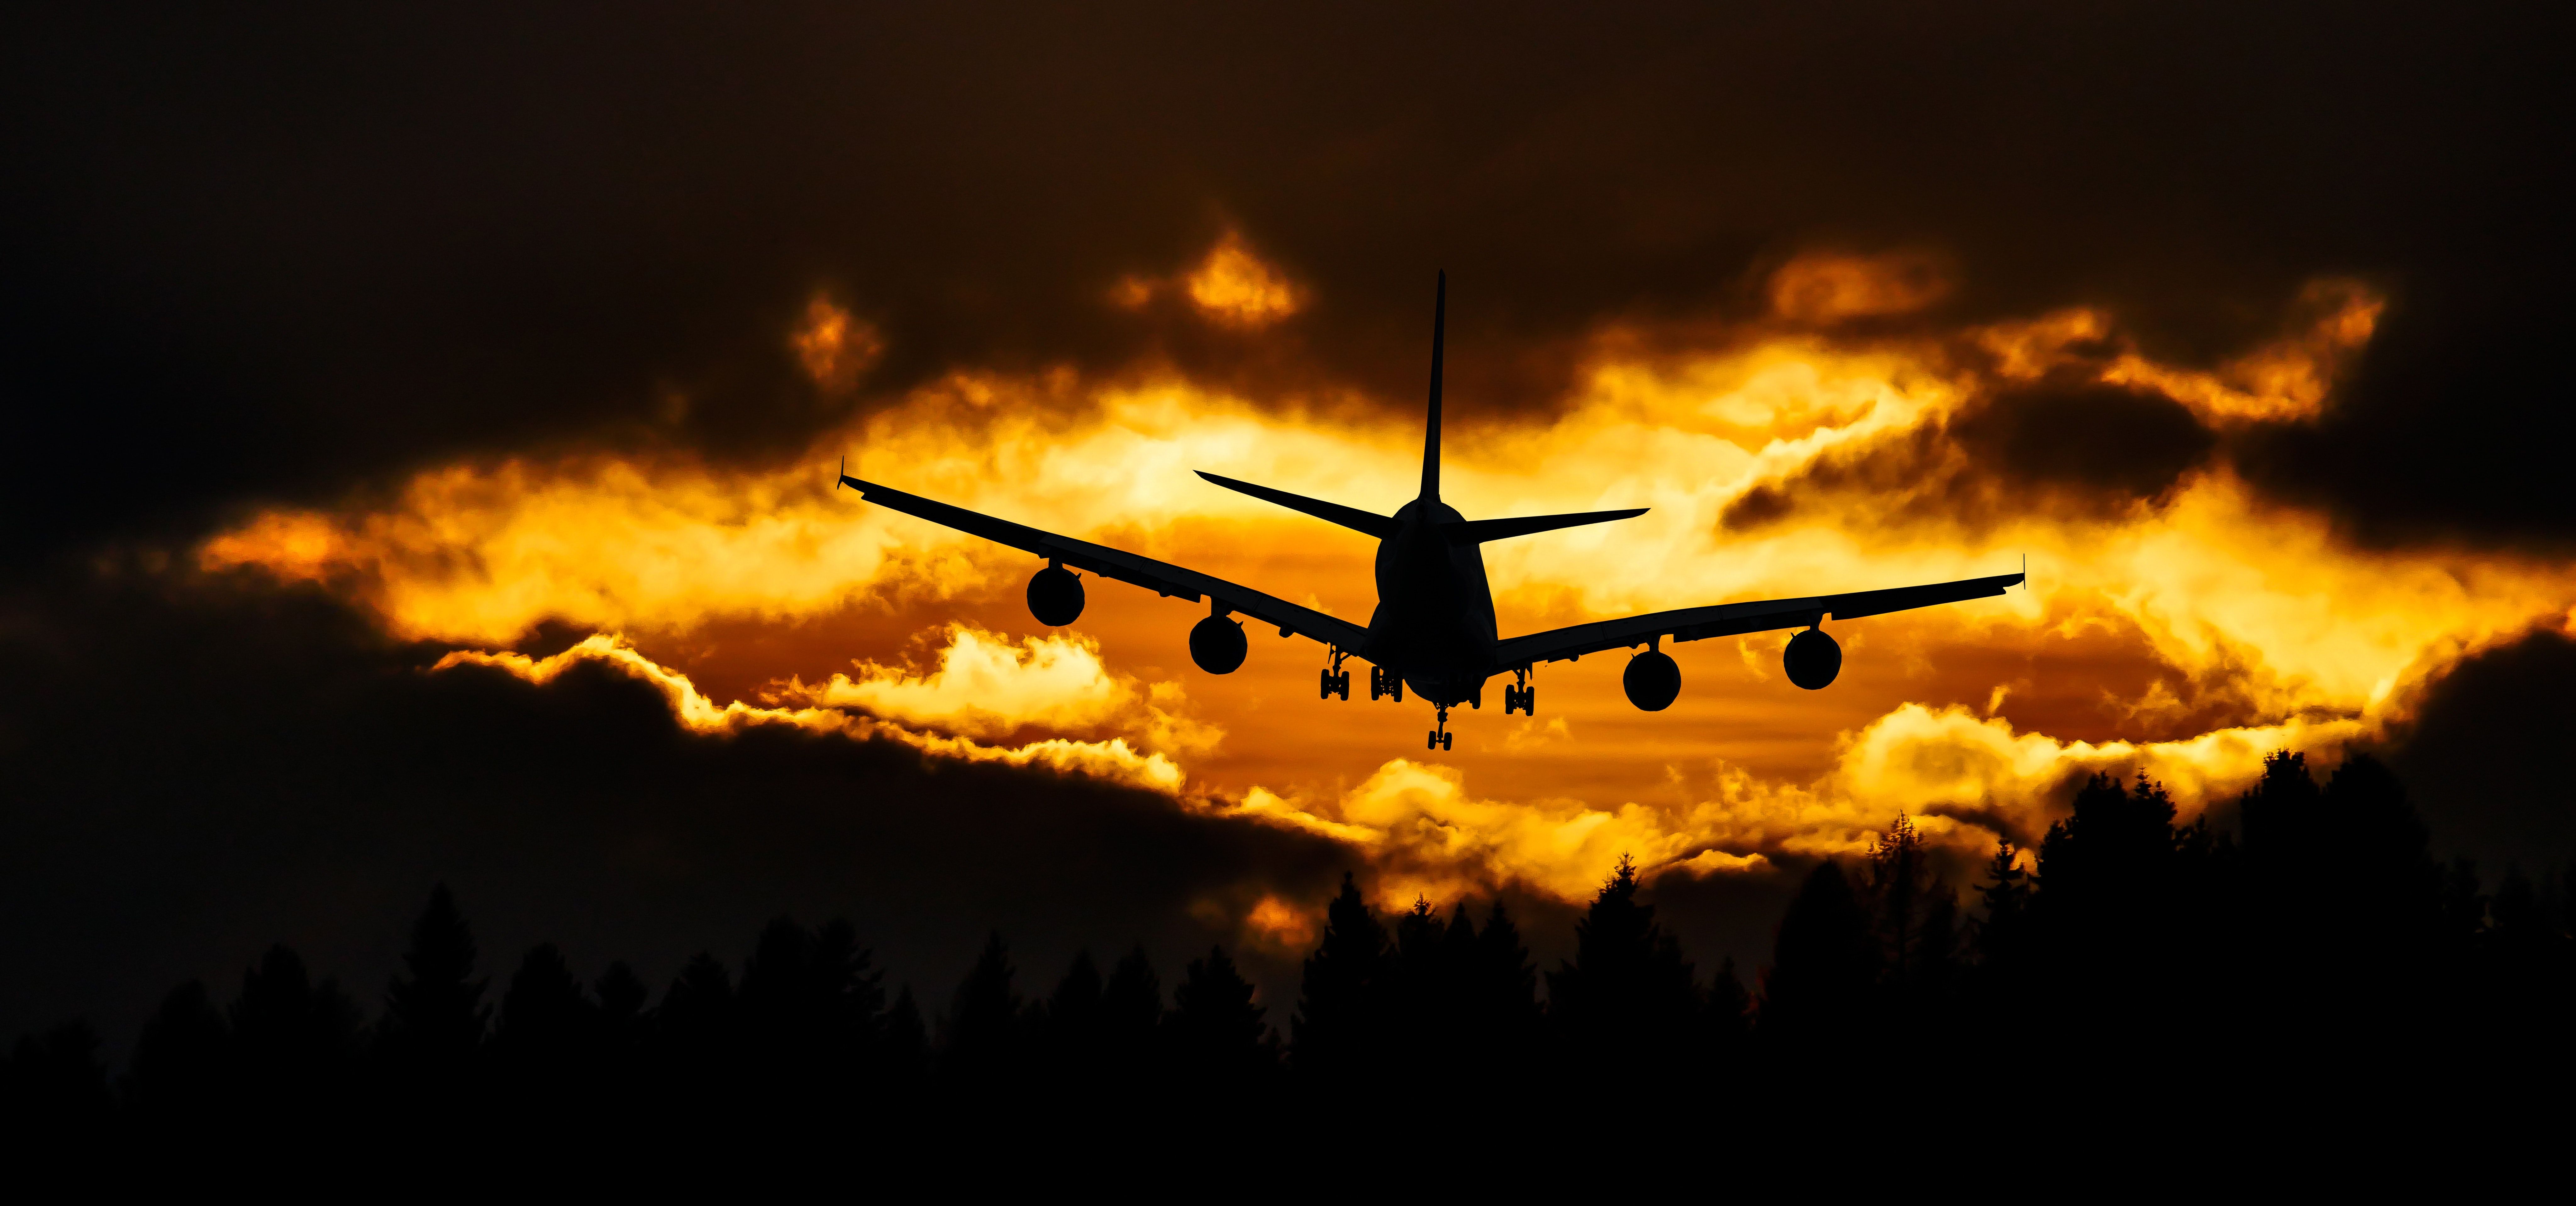 Silhouette of Airplane during Sunset · Free